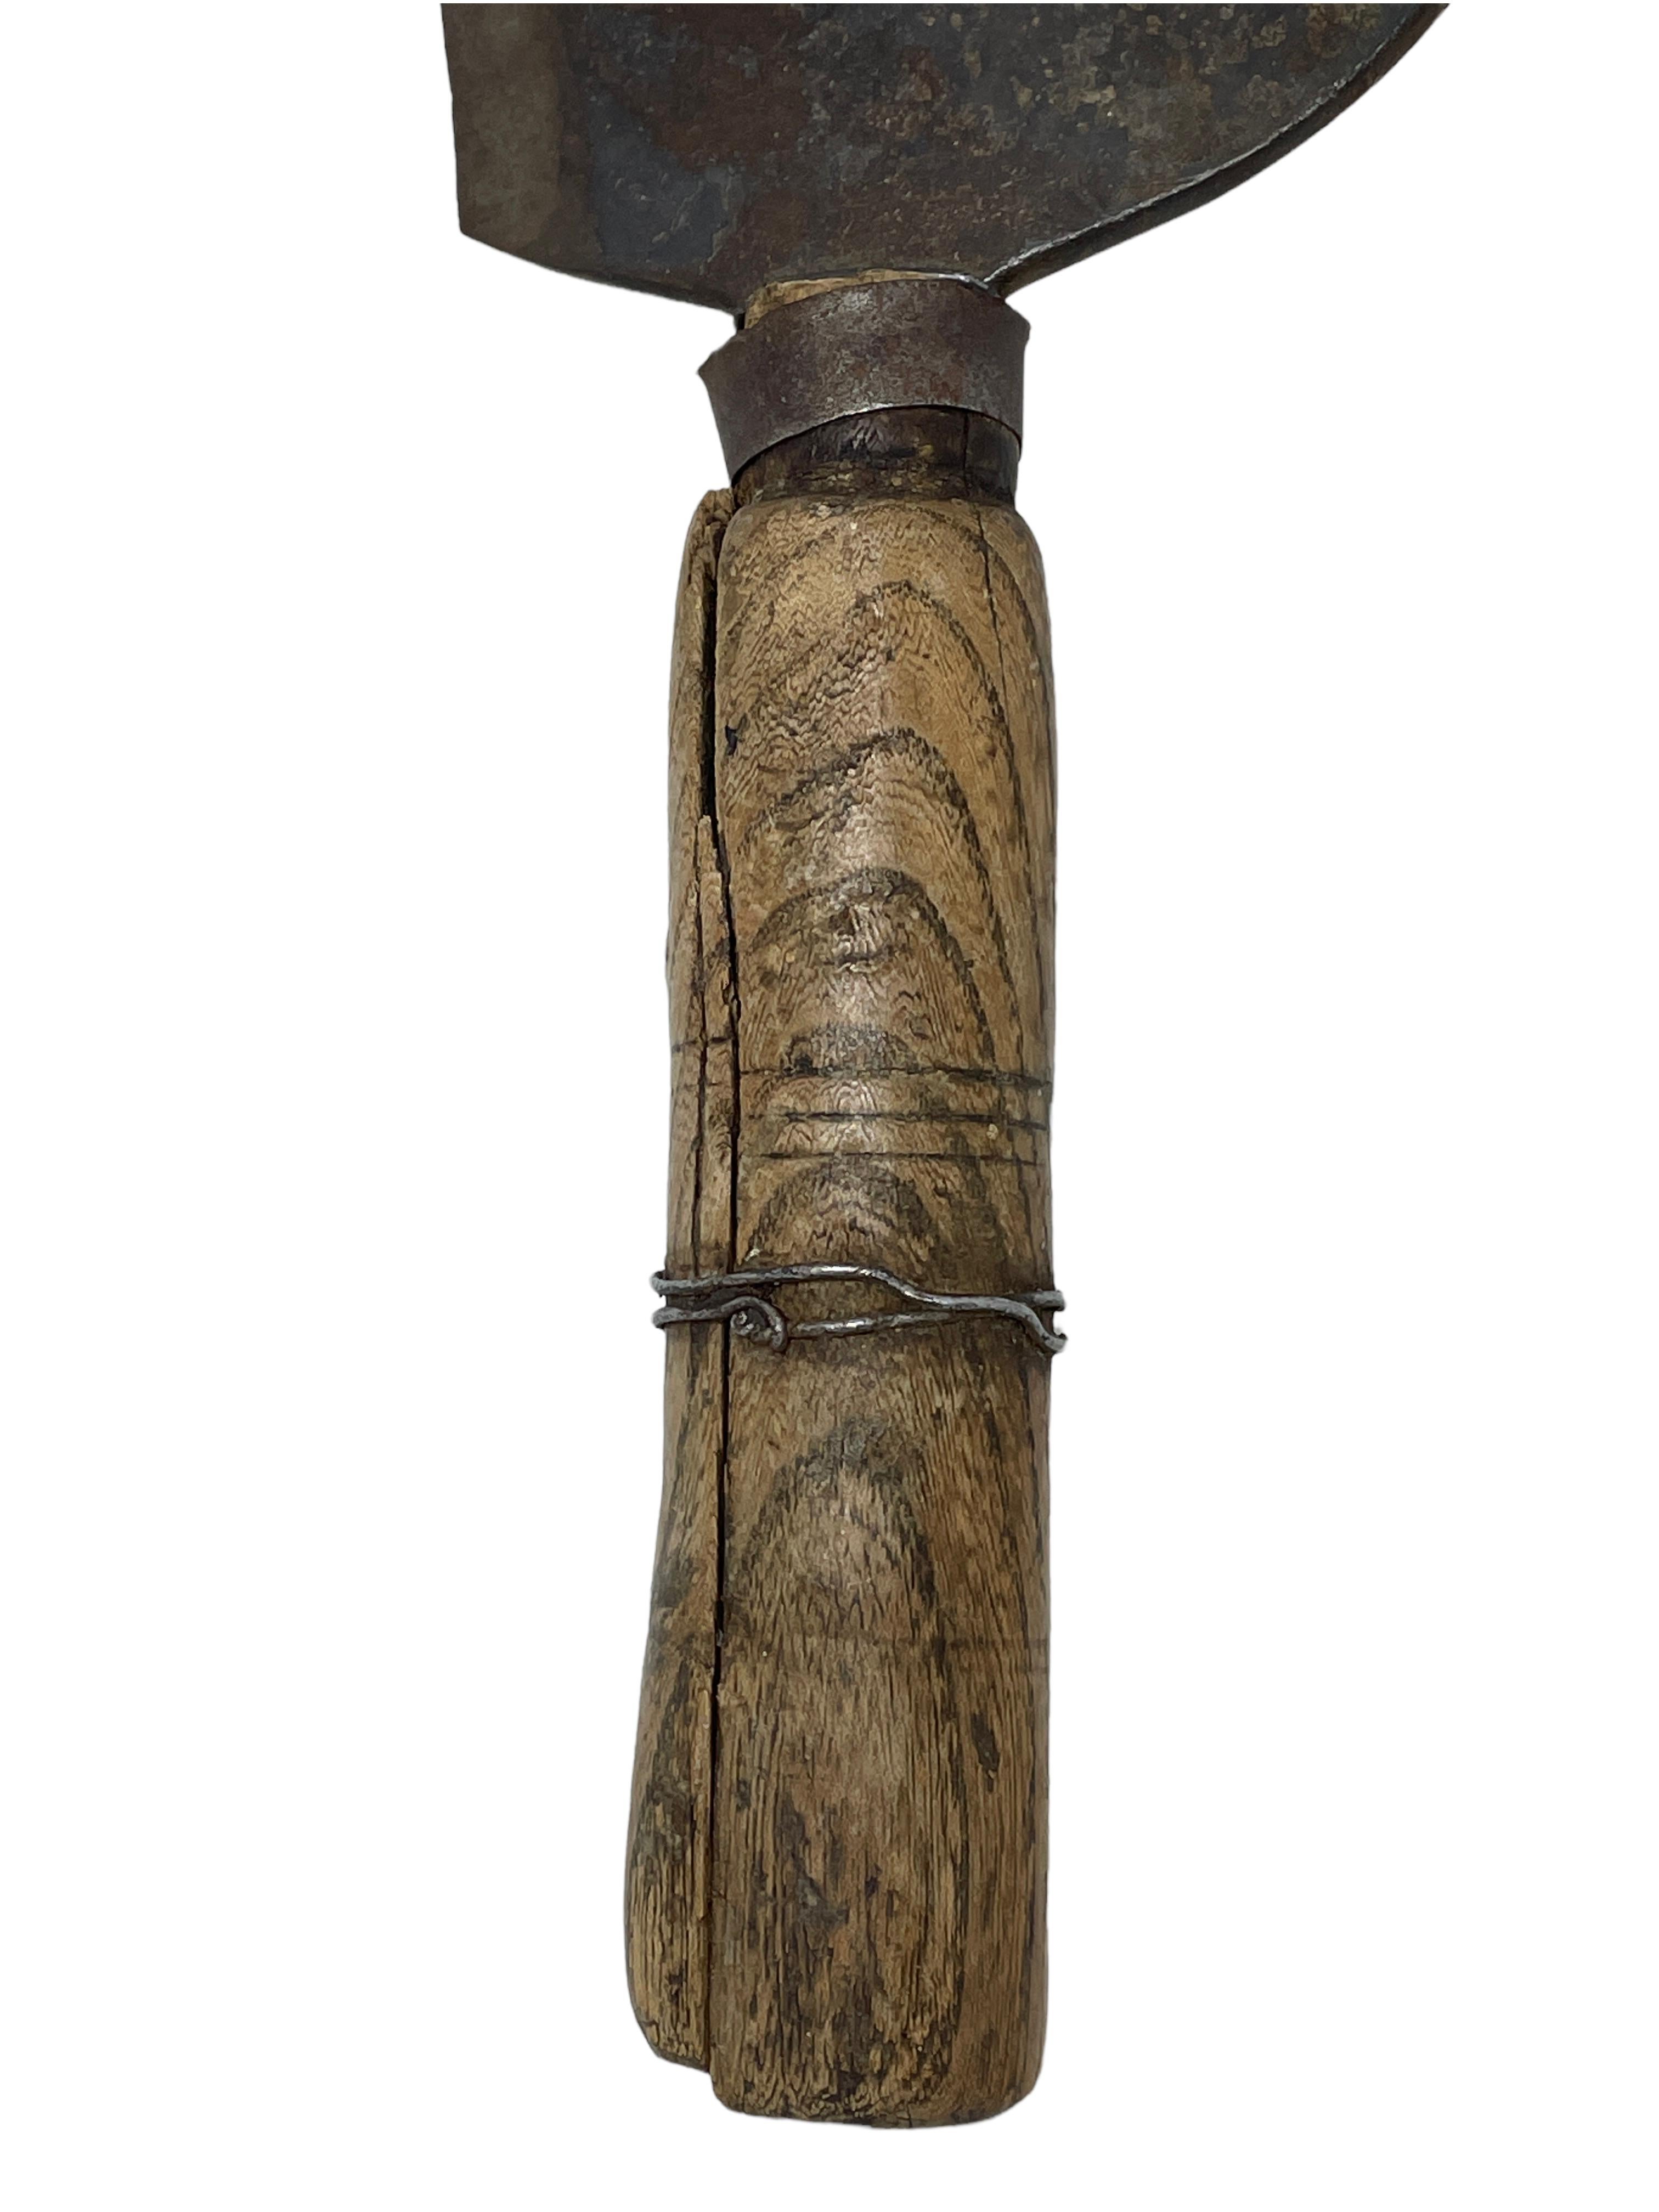 Wood Highly Decorative 19th Century European Italian Cleaver, Kitchen Utensil For Sale